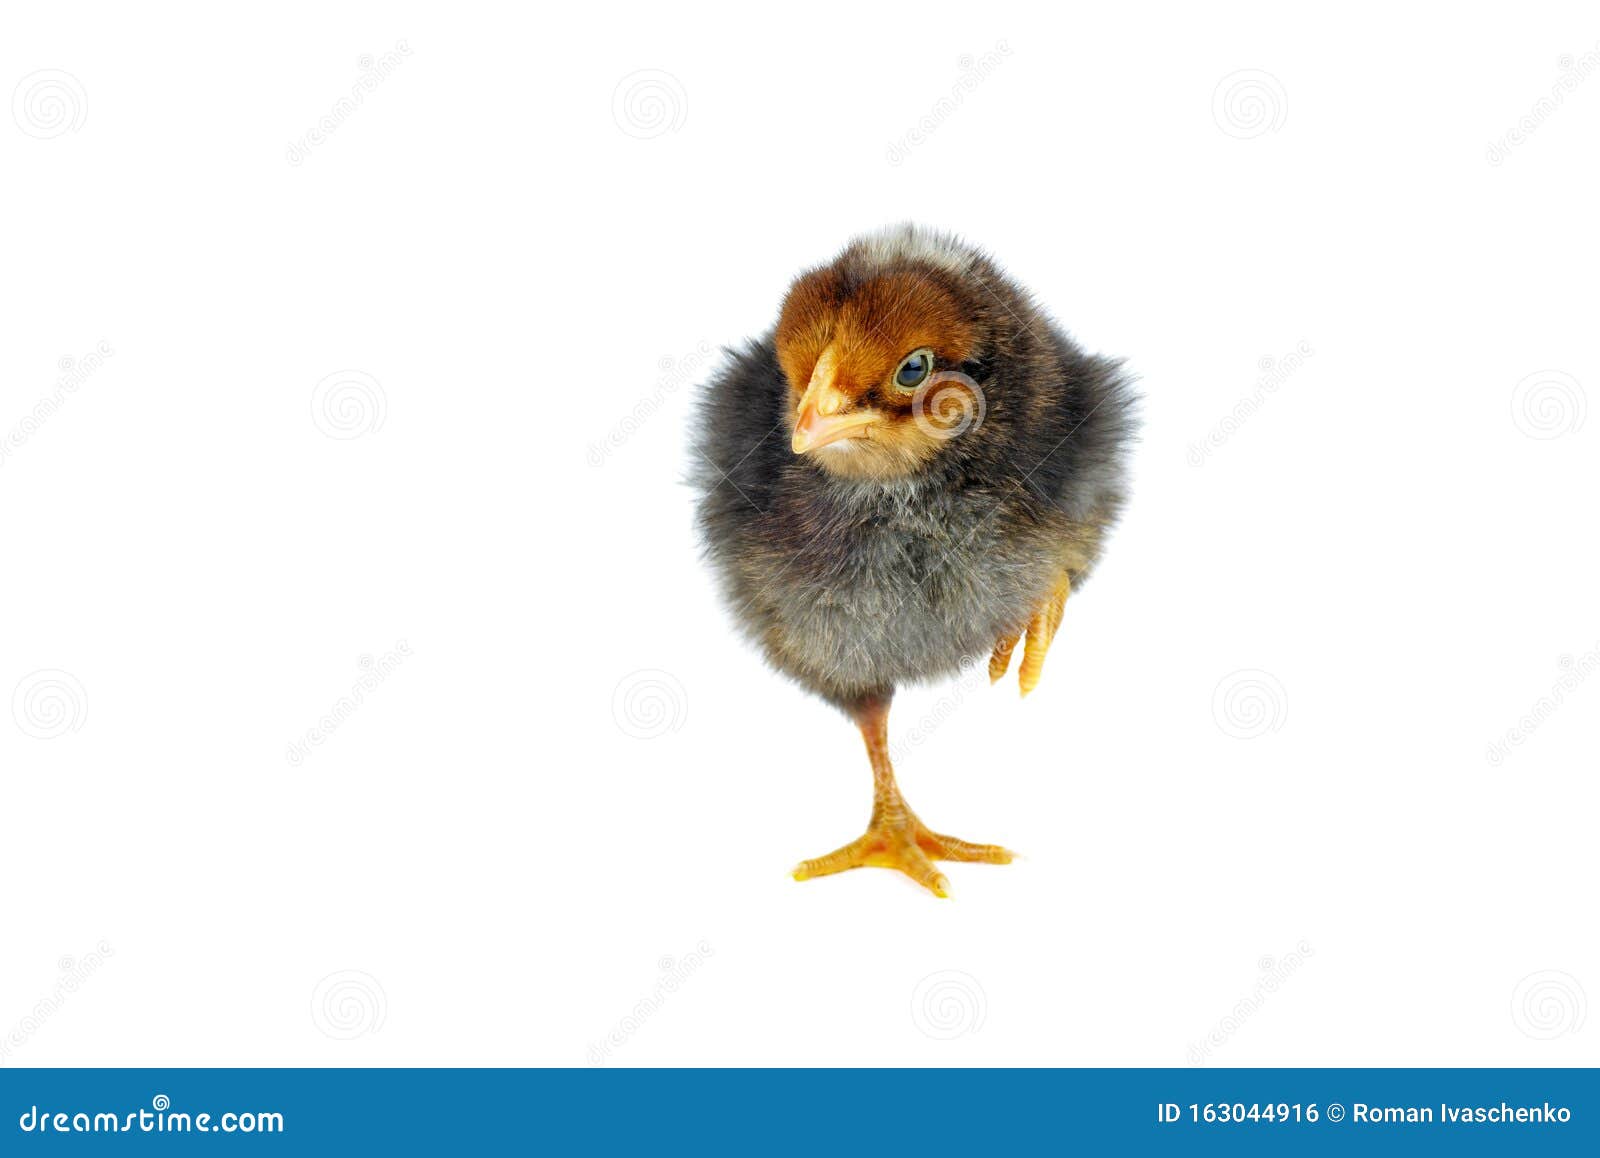 Black Chicken On White Background Stock Photo - Image of young